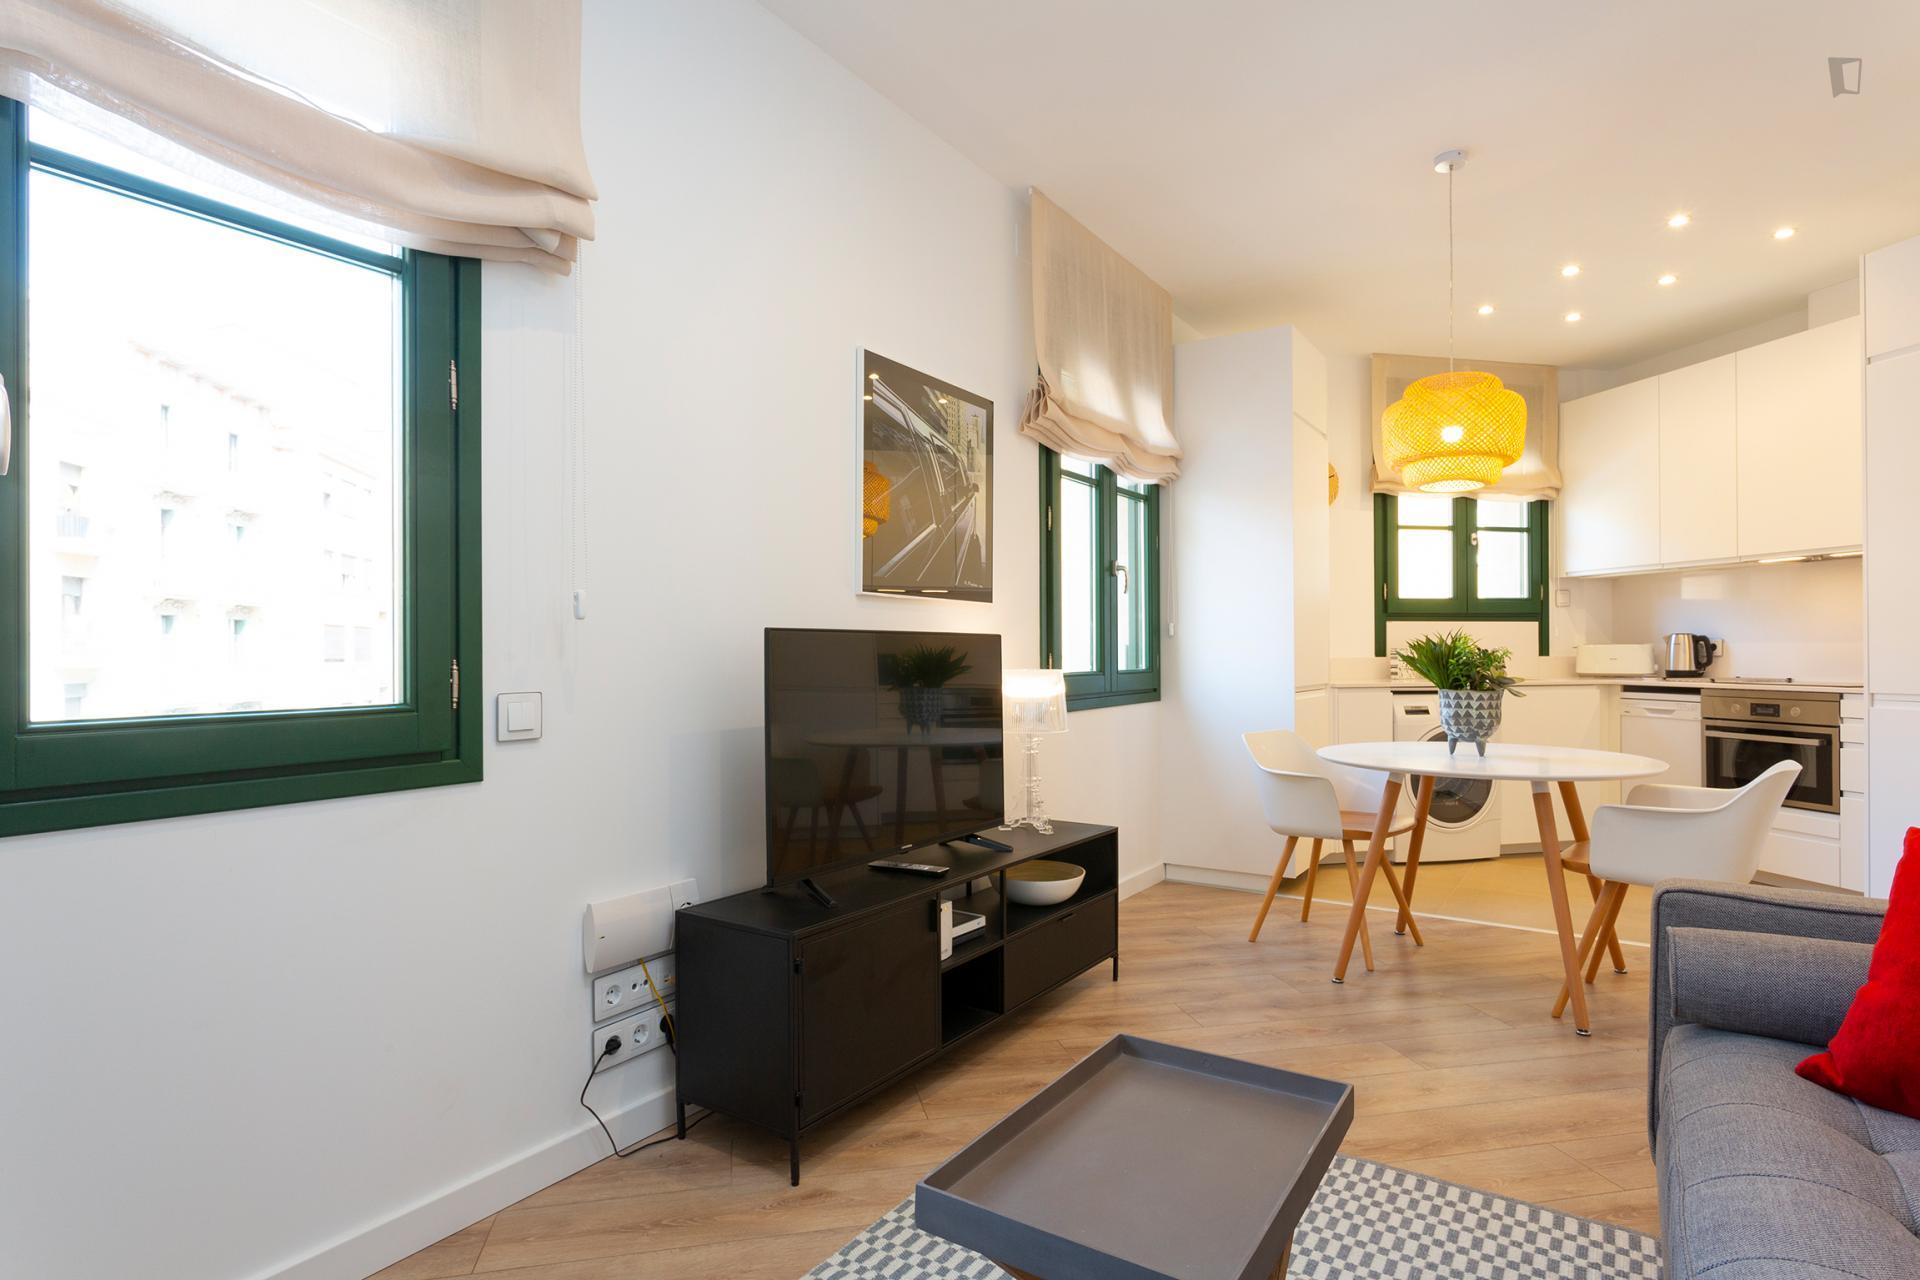 Portugalete 4 - Modern flat in Barcelona for expats